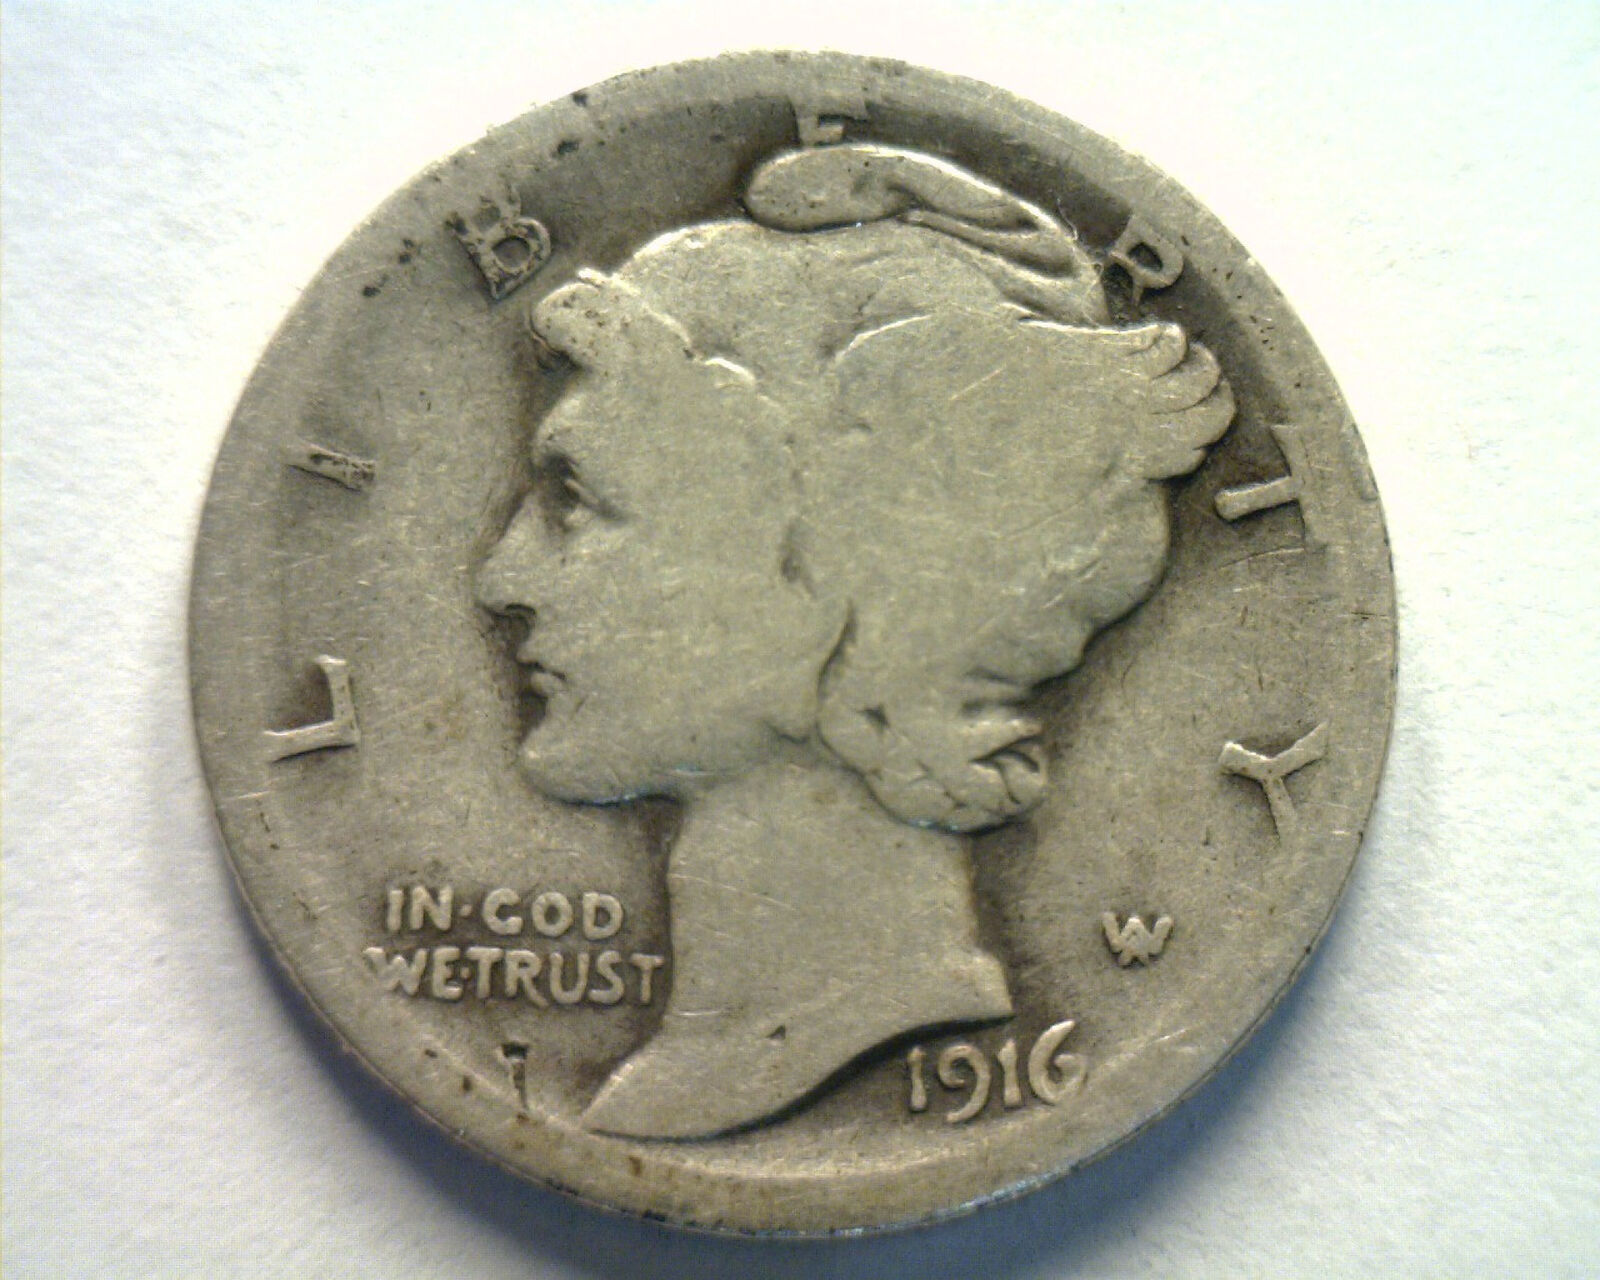 Primary image for 1916 MERCURY DIME GOOD G NICE ORIGINAL COIN FROM BOBS COINS FAST SHIPMENT